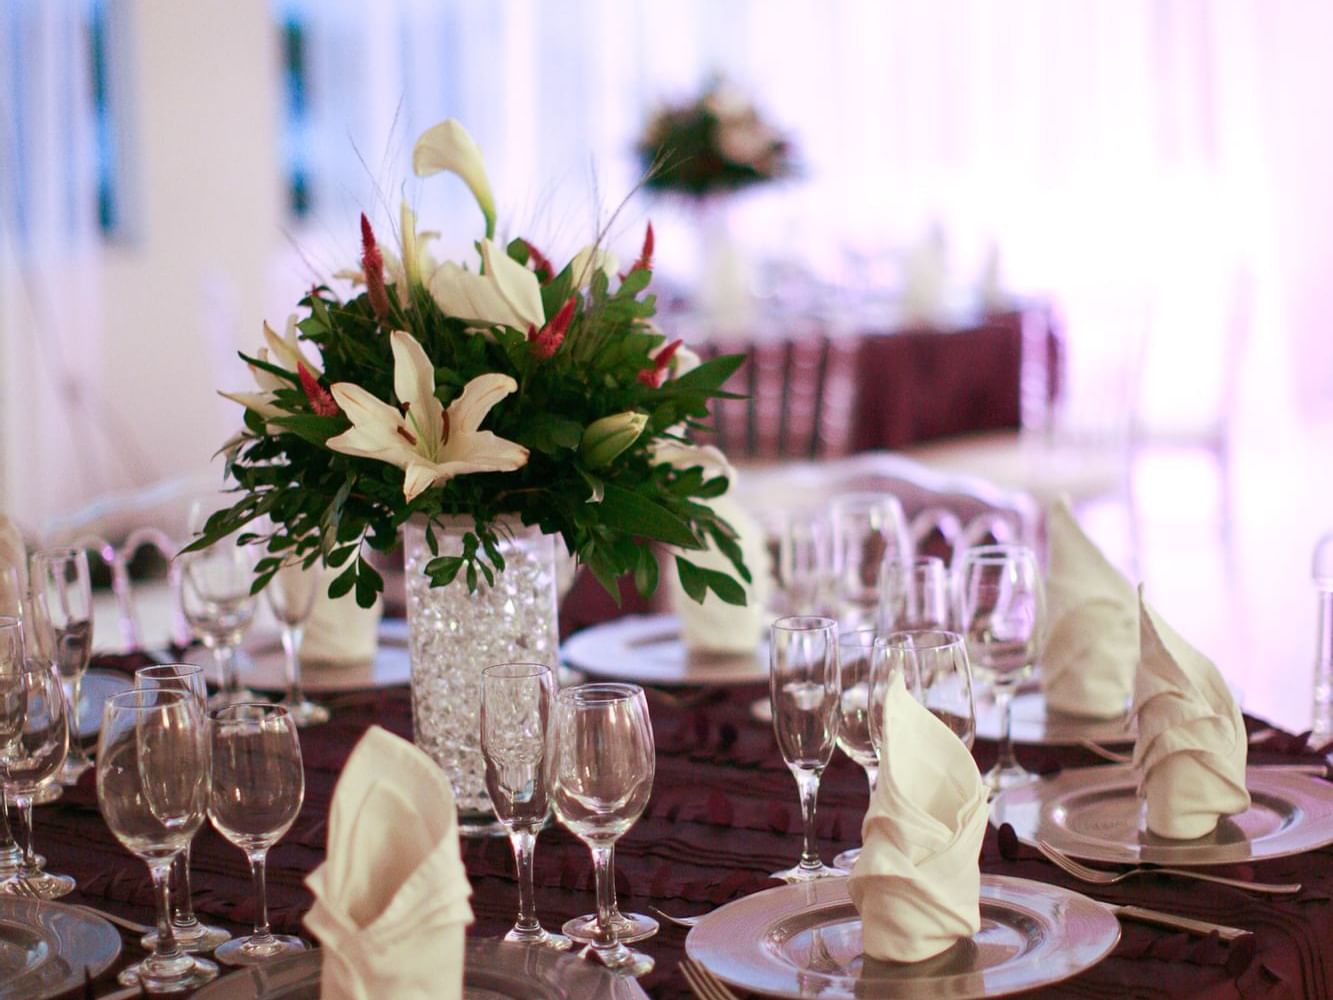 Banquet table set-up in Edna Room at Hotel Montana Haiti